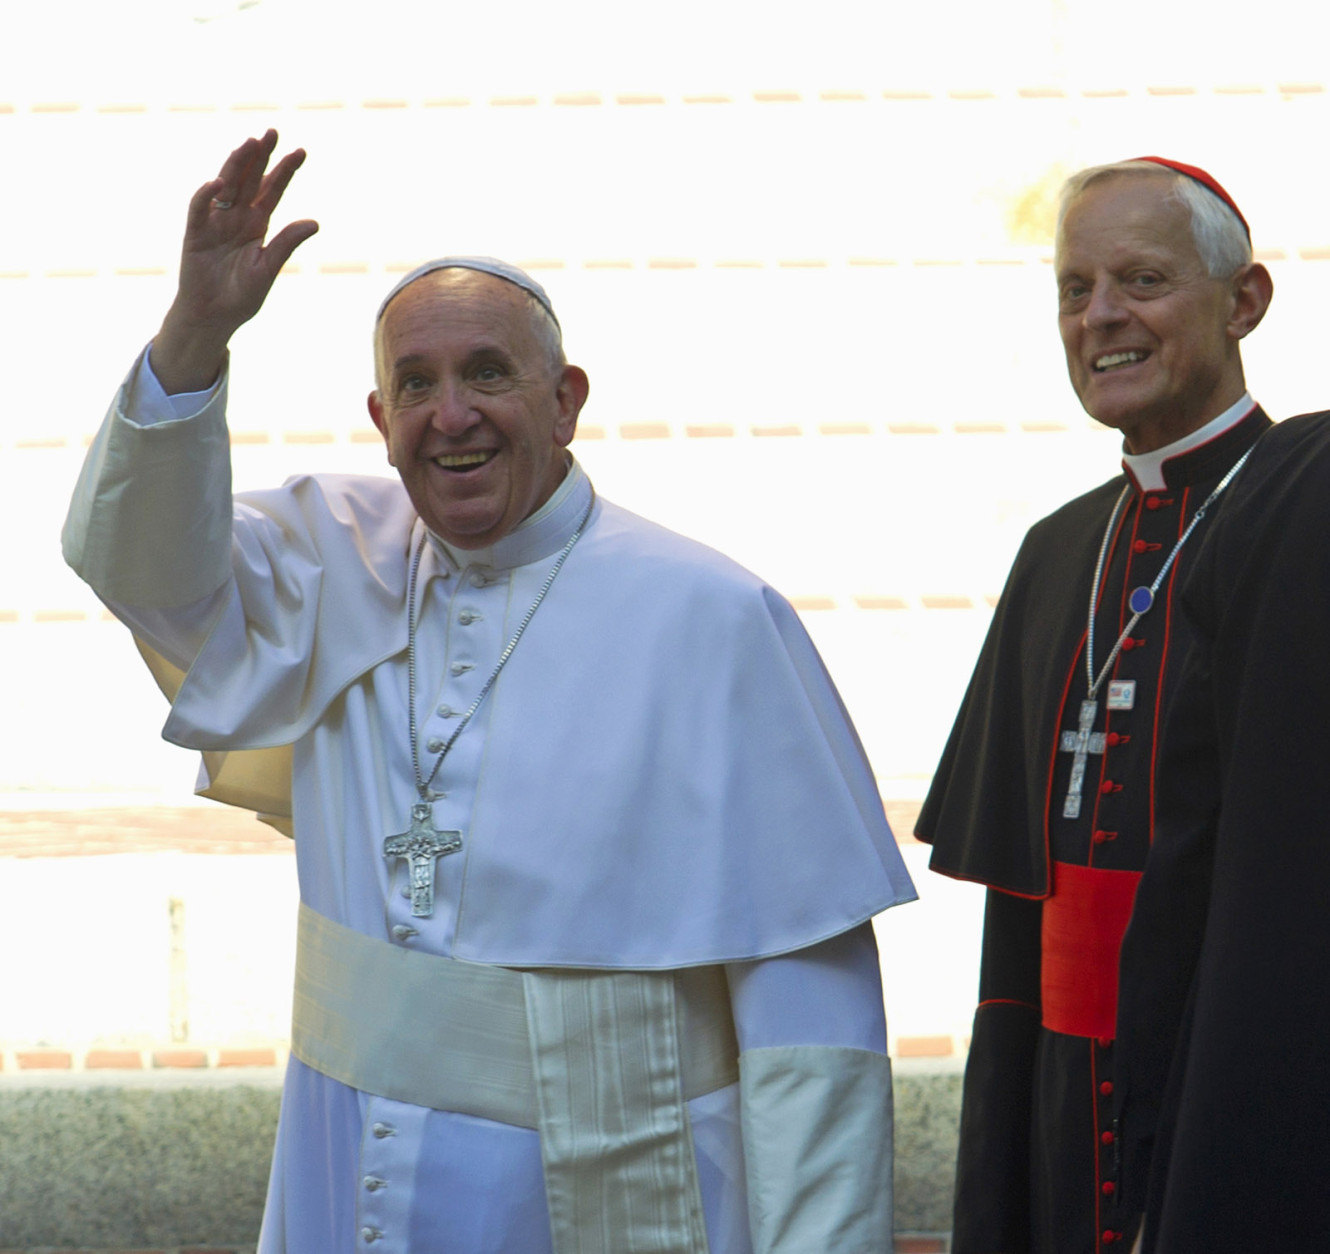 Pope Francis, accompanied by Cardinal Donald Wuerl, archbishop of Washington, waves to the crowd as they arrive  at St. Mathews Cathedral in Washington, Wednesday, Sept. 23, 2015. ( AP Photo/Jose Luis Magana)